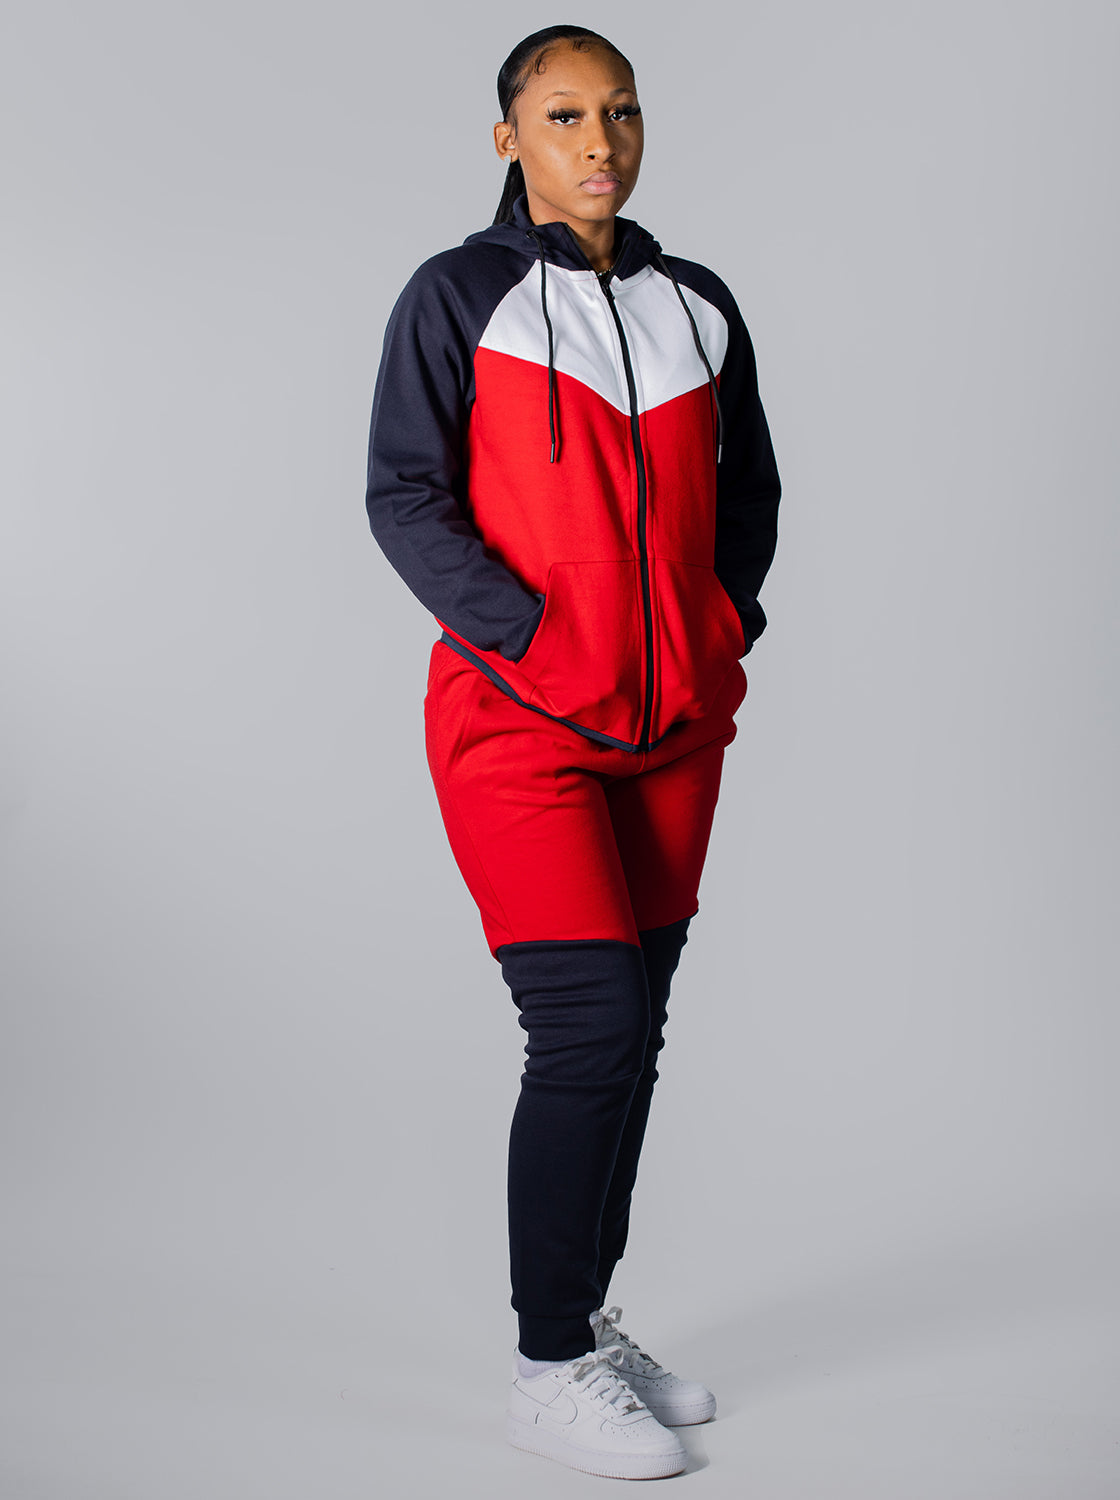 Tech Suits 3 Tone -Red/Navy/White